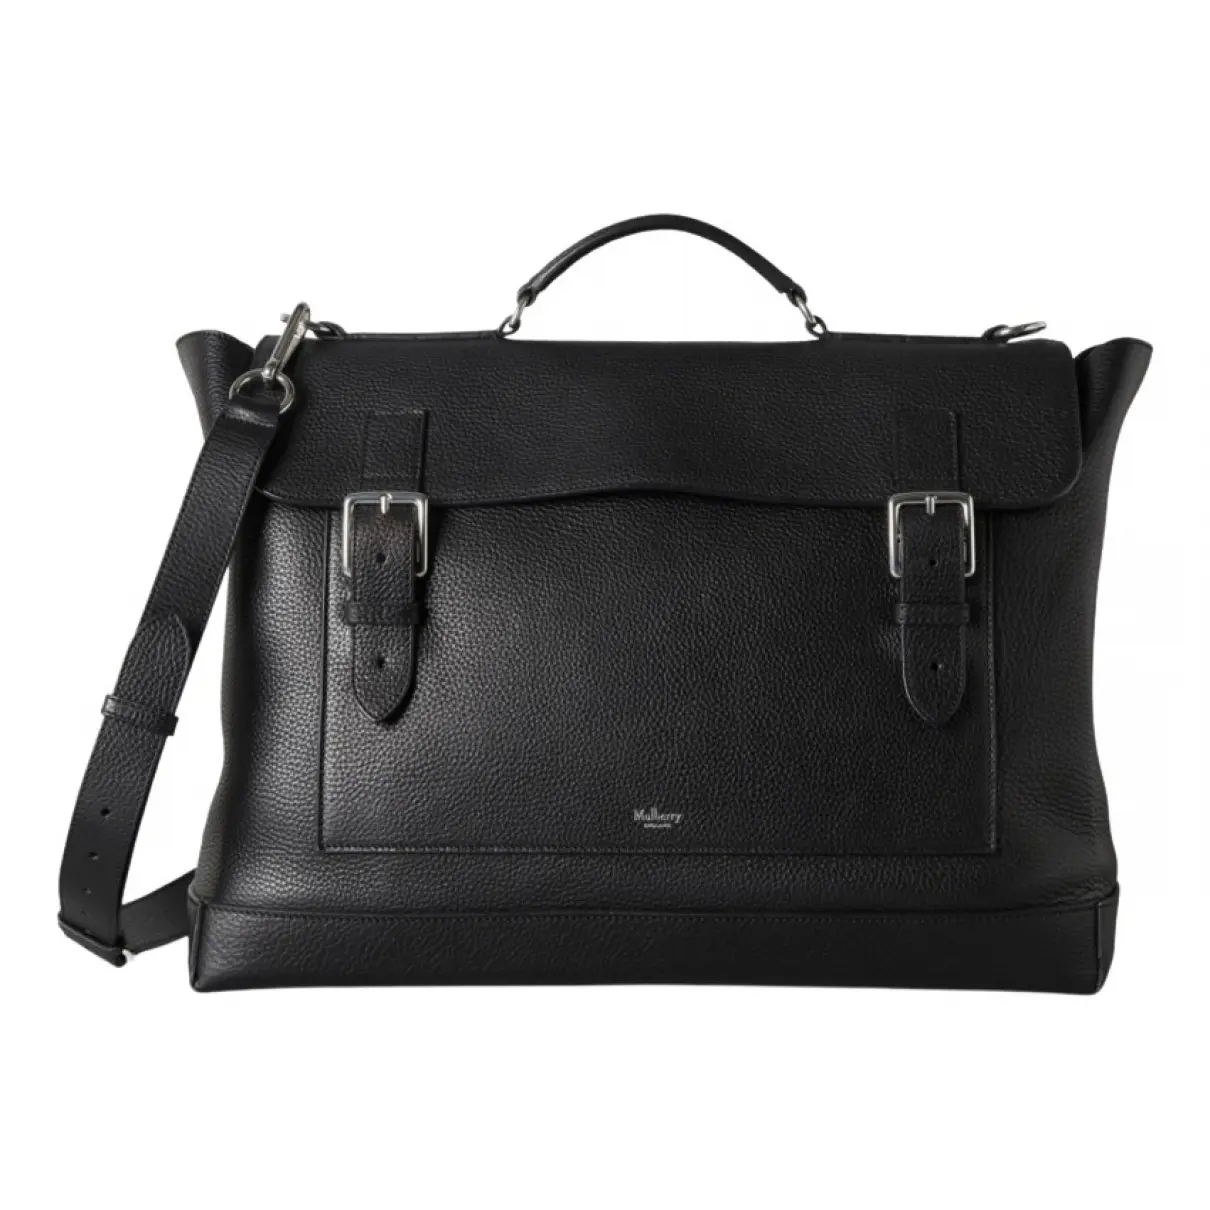 Chiltern leather weekend bag Mulberry